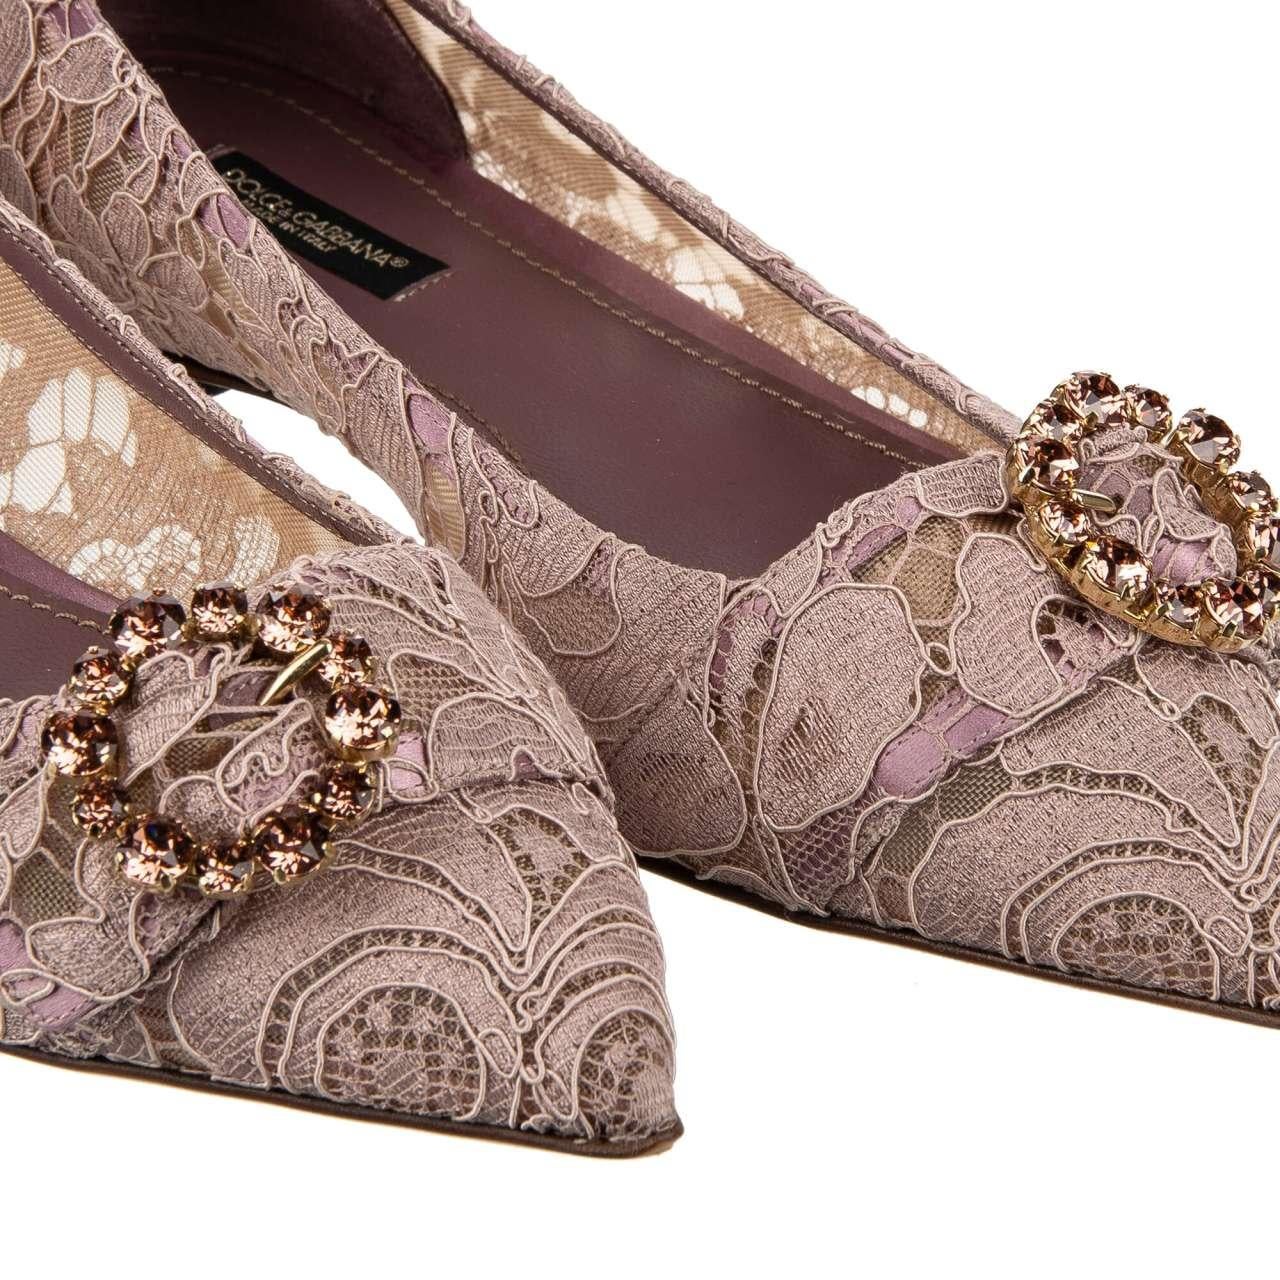 - Pointed Taormina Floral Lace Flats BELLUCCI in purple with crystal brooch by DOLCE & GABBANA - New with Box - MADE IN ITALY - Former RRP: EUR 645 - Taormina Floral Lace - Crystal brooch - Model: CB0119-AU545-8L919 - Material: 59% Viscose, 30%